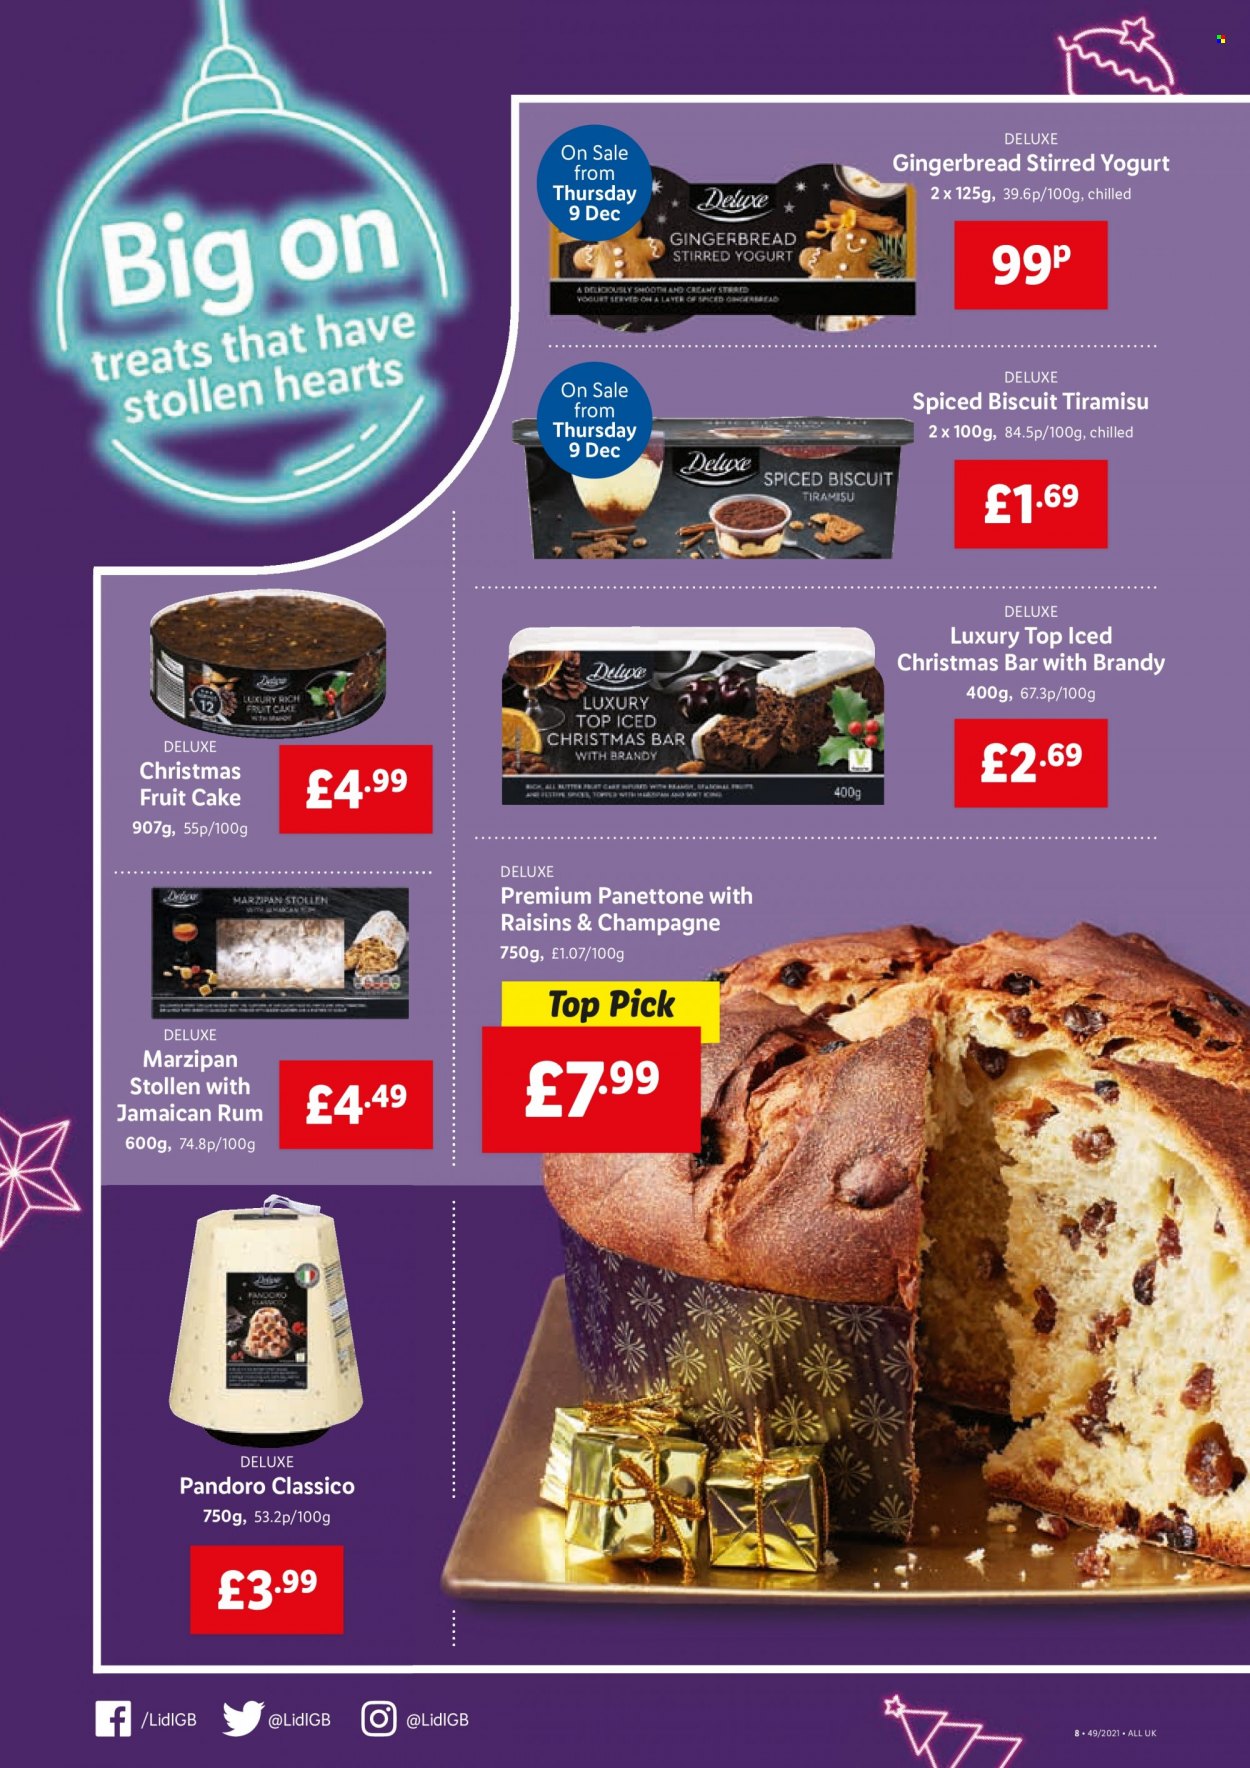 thumbnail - Lidl offer  - 09/12/2021 - 15/12/2021 - Sales products - Sony, cake, gingerbread, marzipan stollen, stollen, panettone, christmas cake, tiramisu, pandoro, yoghurt, biscuit, bars, dried fruit, brandy, rum. Page 4.